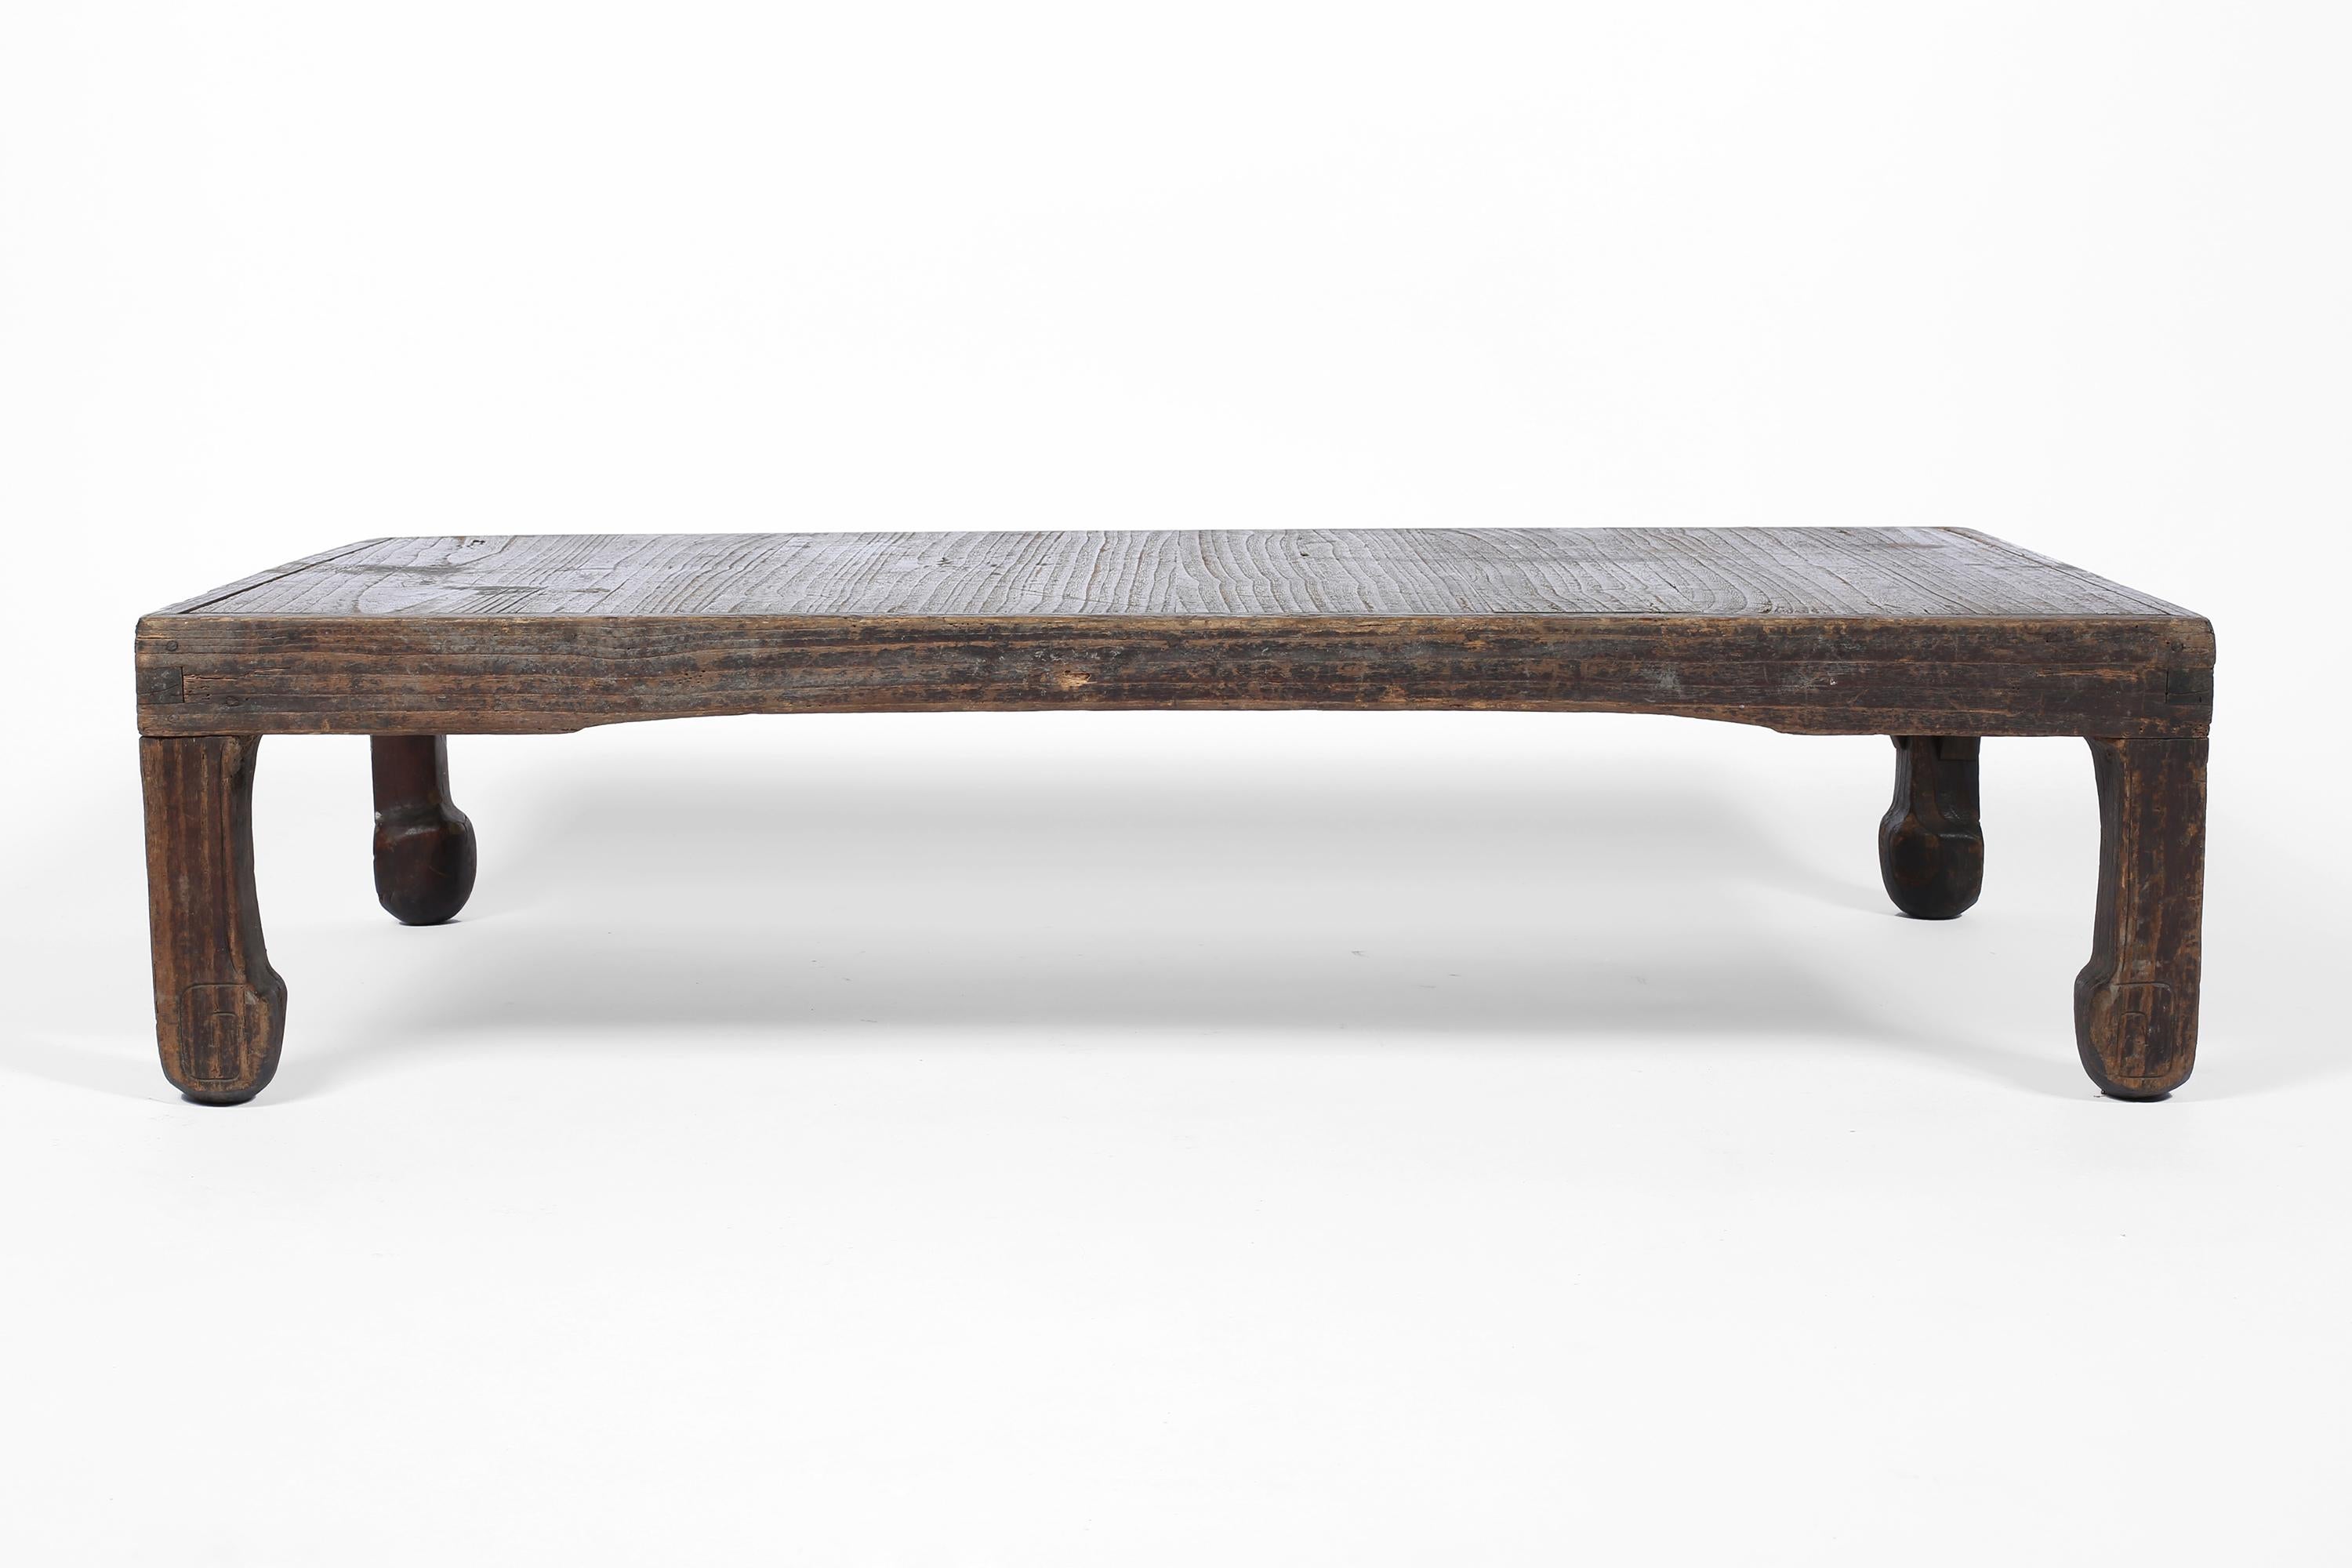 An Edo period low ‘zataku’ table in heavily patinated cedar timber. Pegged and jointed in construction, with traditional decorative carved legs. Japanese, circa 1850.